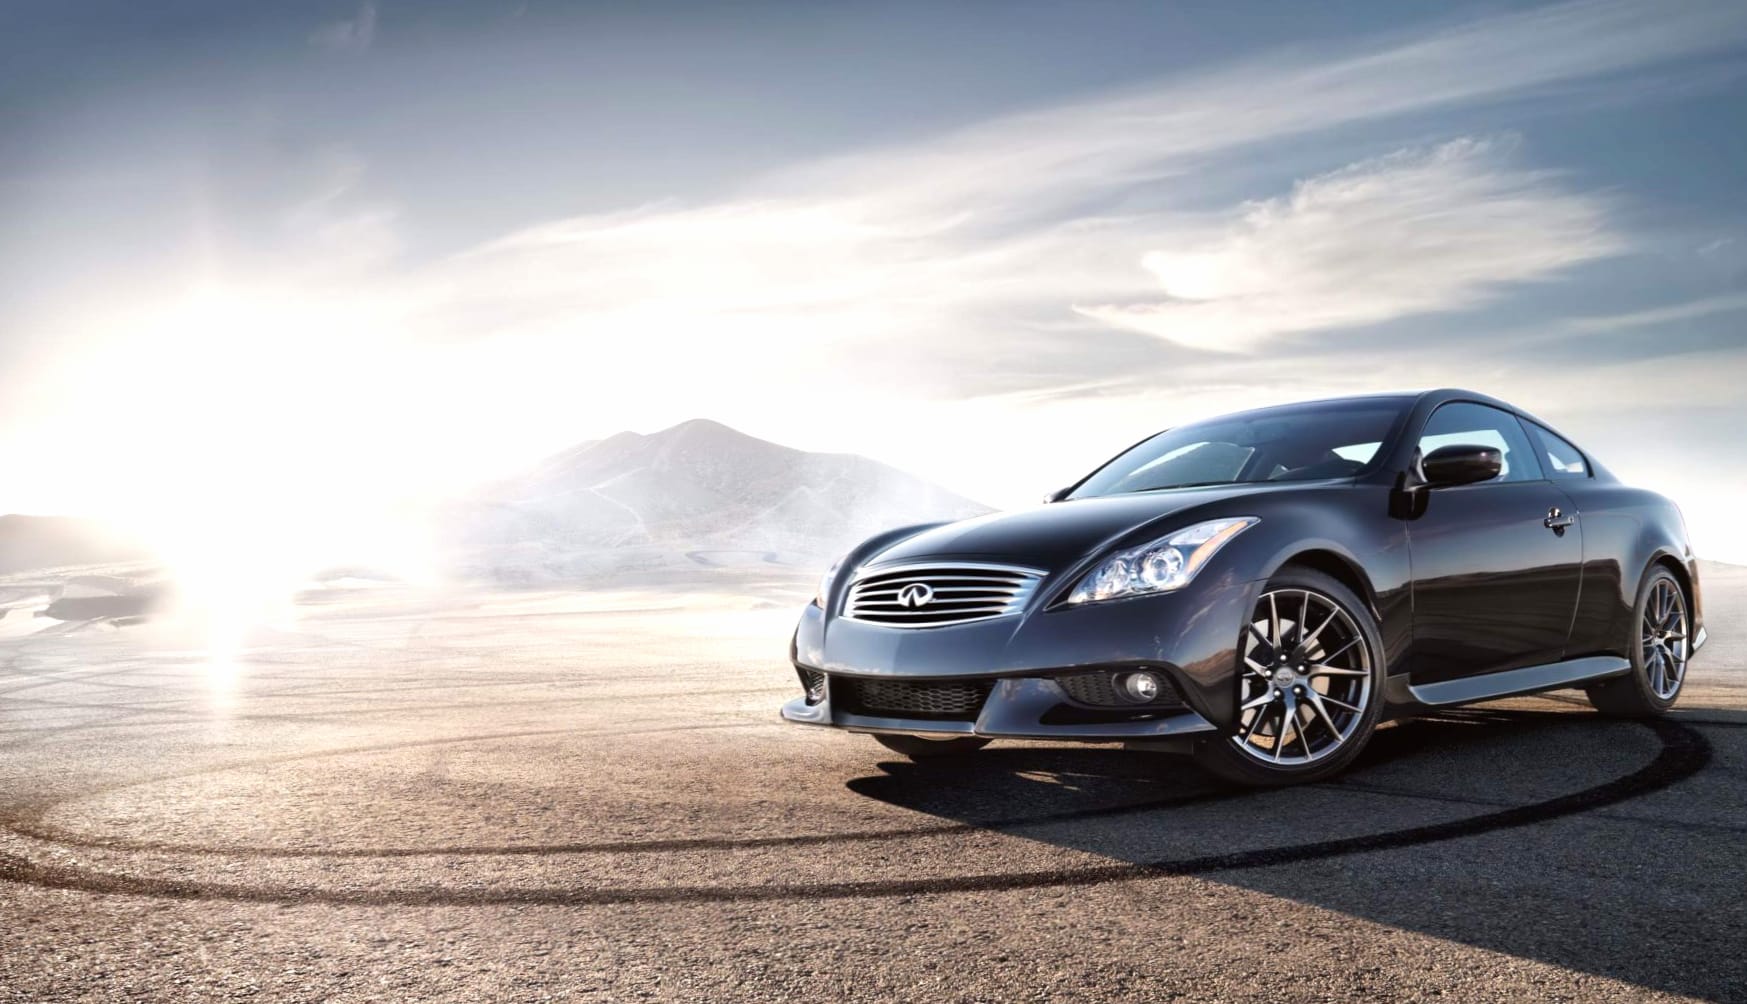 Infiniti G37 Coupe wallpapers HD quality